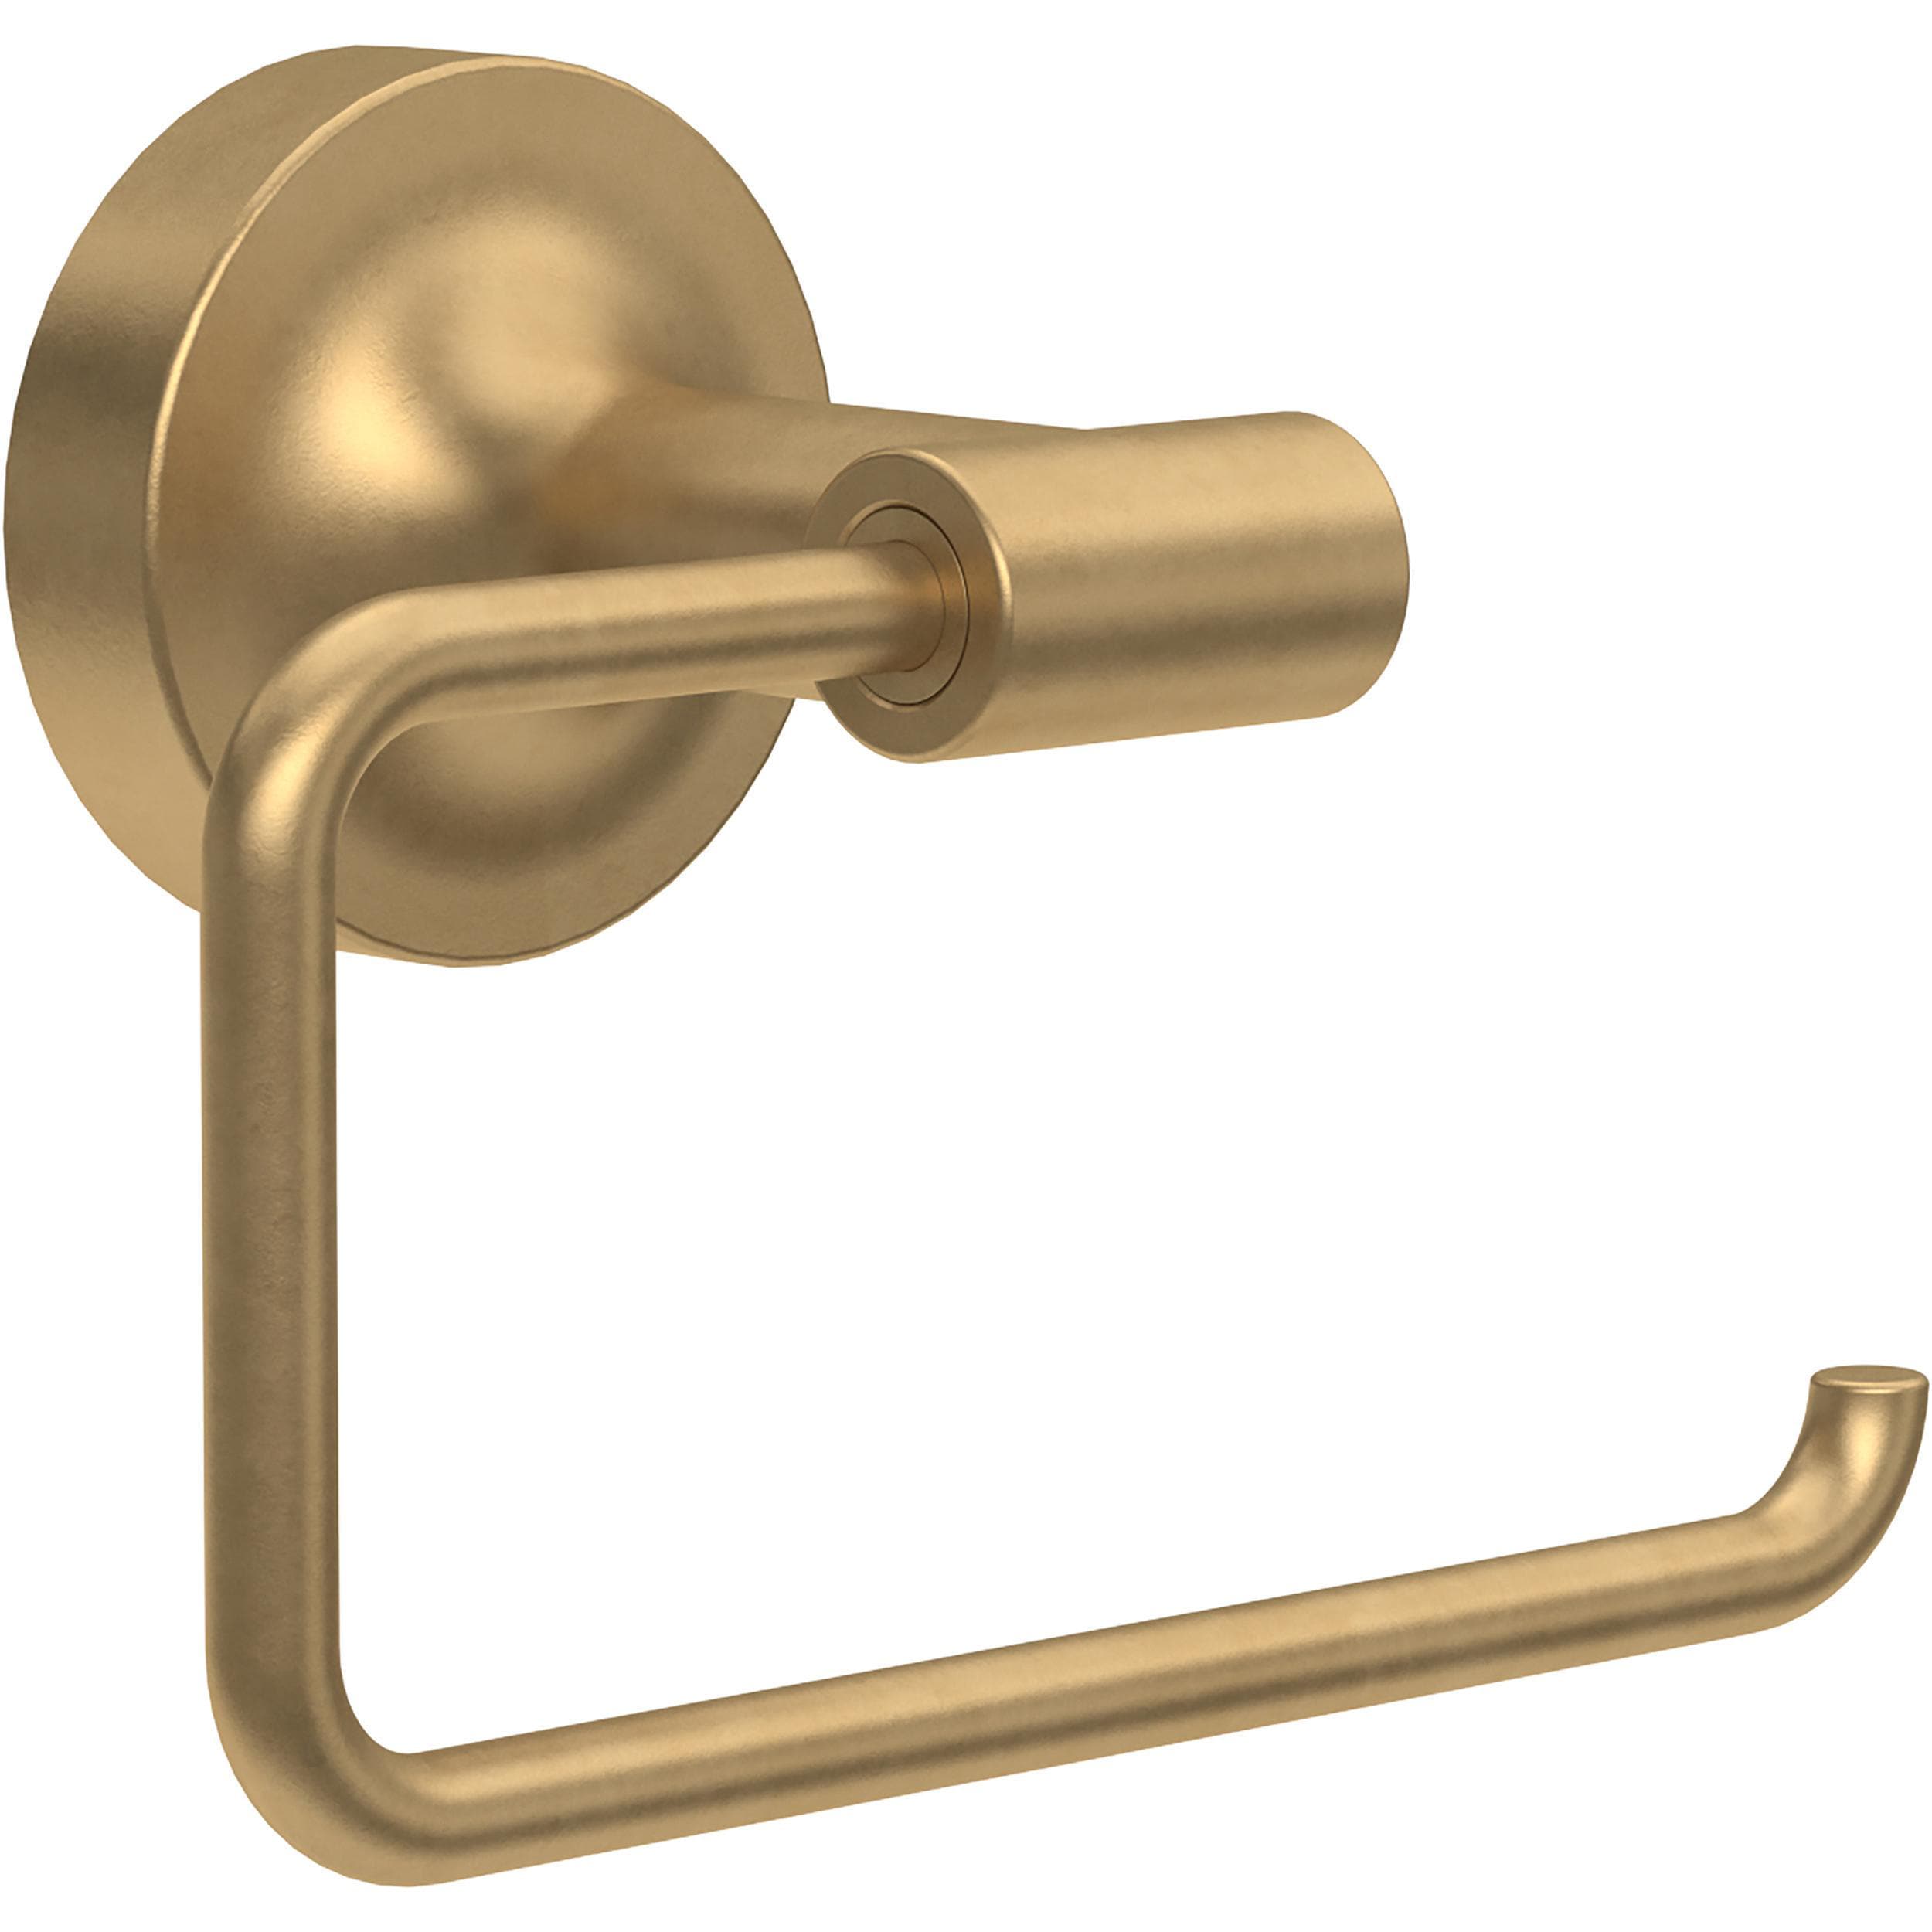 Details about   1 Solid Brass Toilet Paper Holder Roller Replacement W/ Spring FRANKLIN brass 